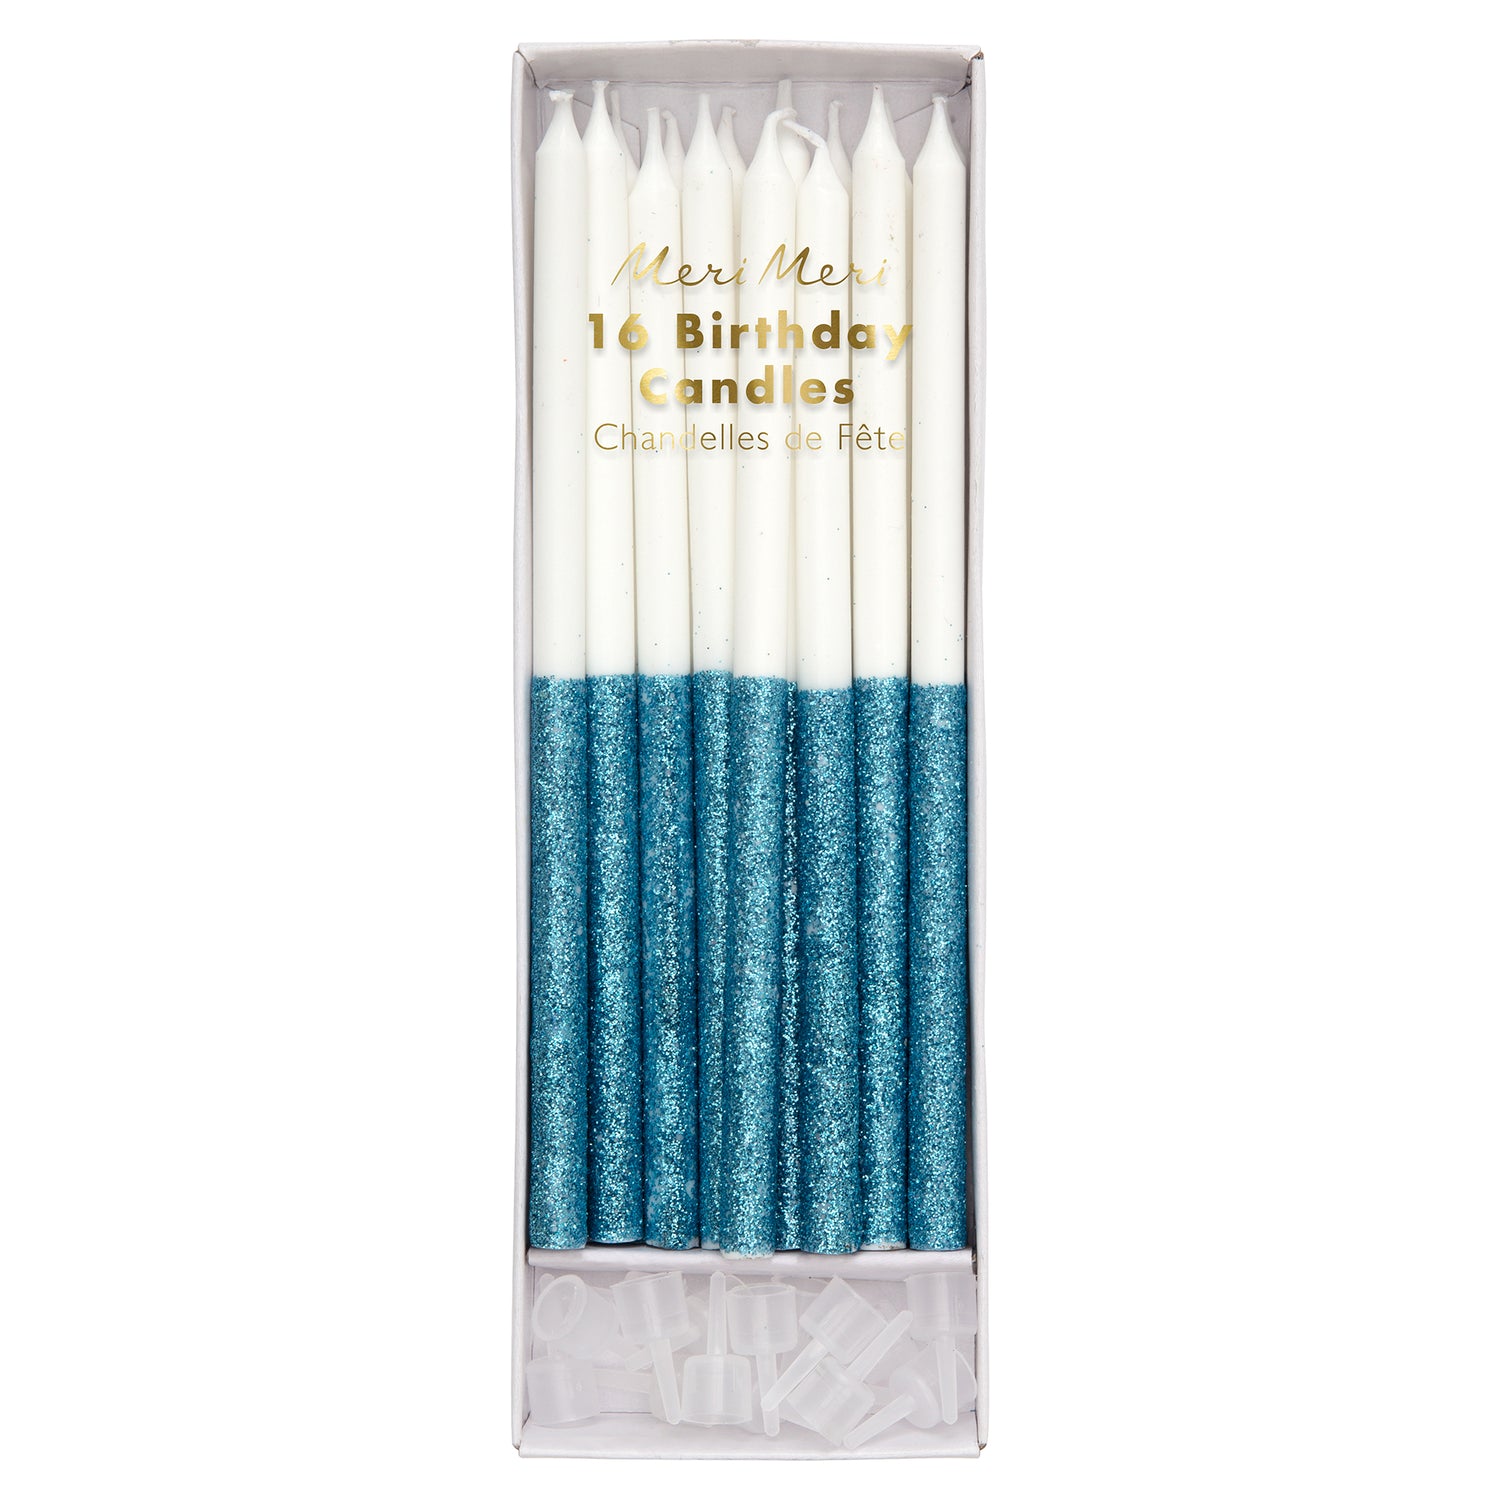 Blue glitter dipped party candles